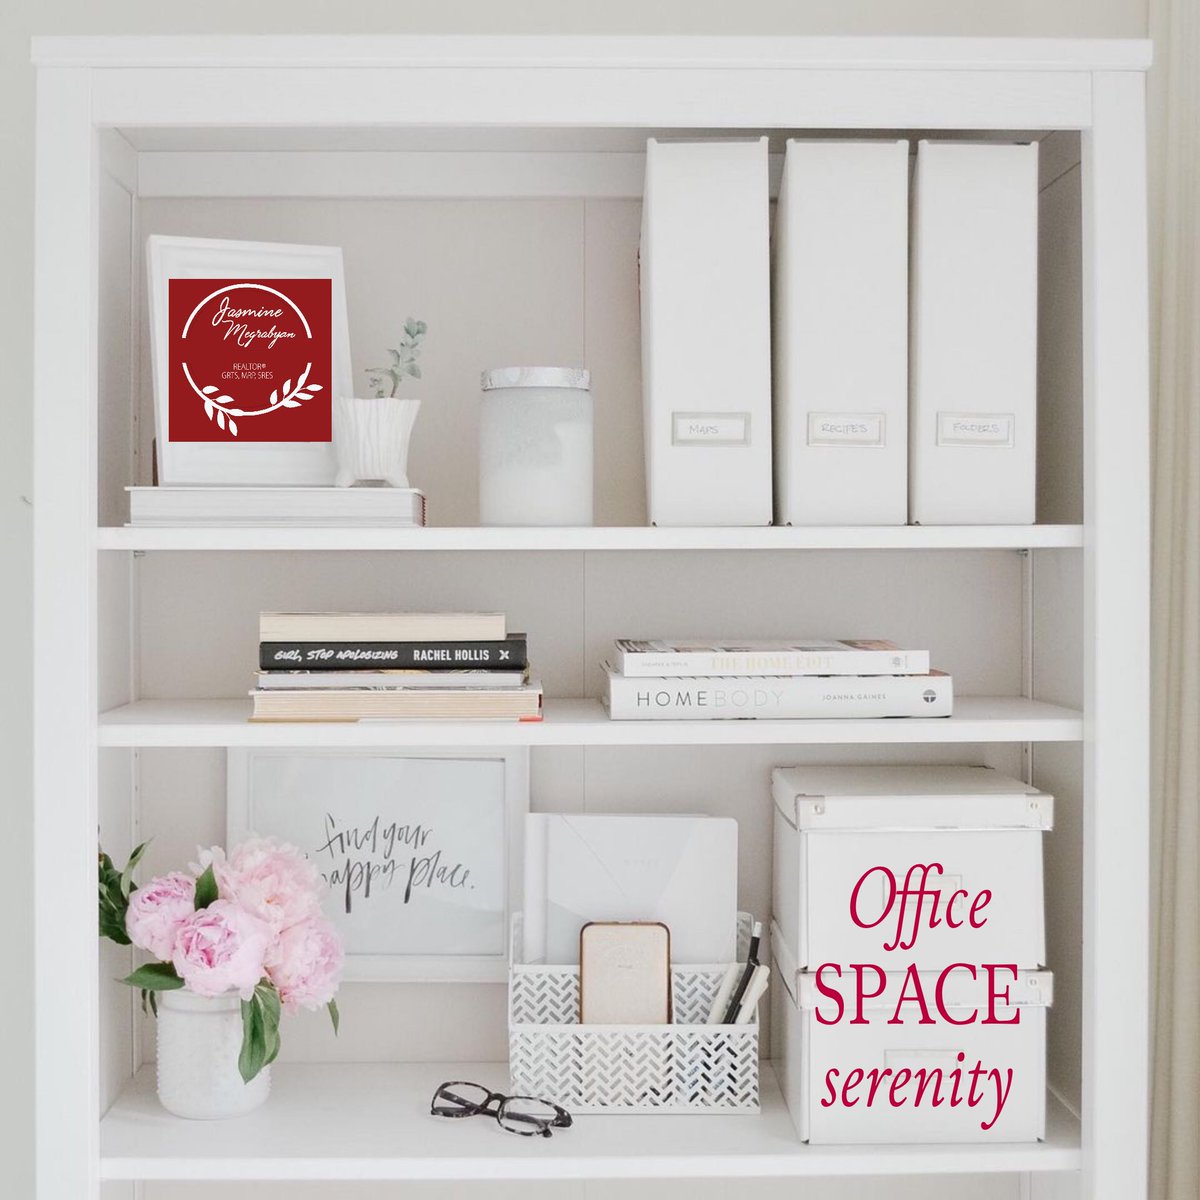 Create a space that invites you to do your best work! #myhappyplace #officedesign #serenity #whiteinteriors #kwestatesbyjasmine🏡